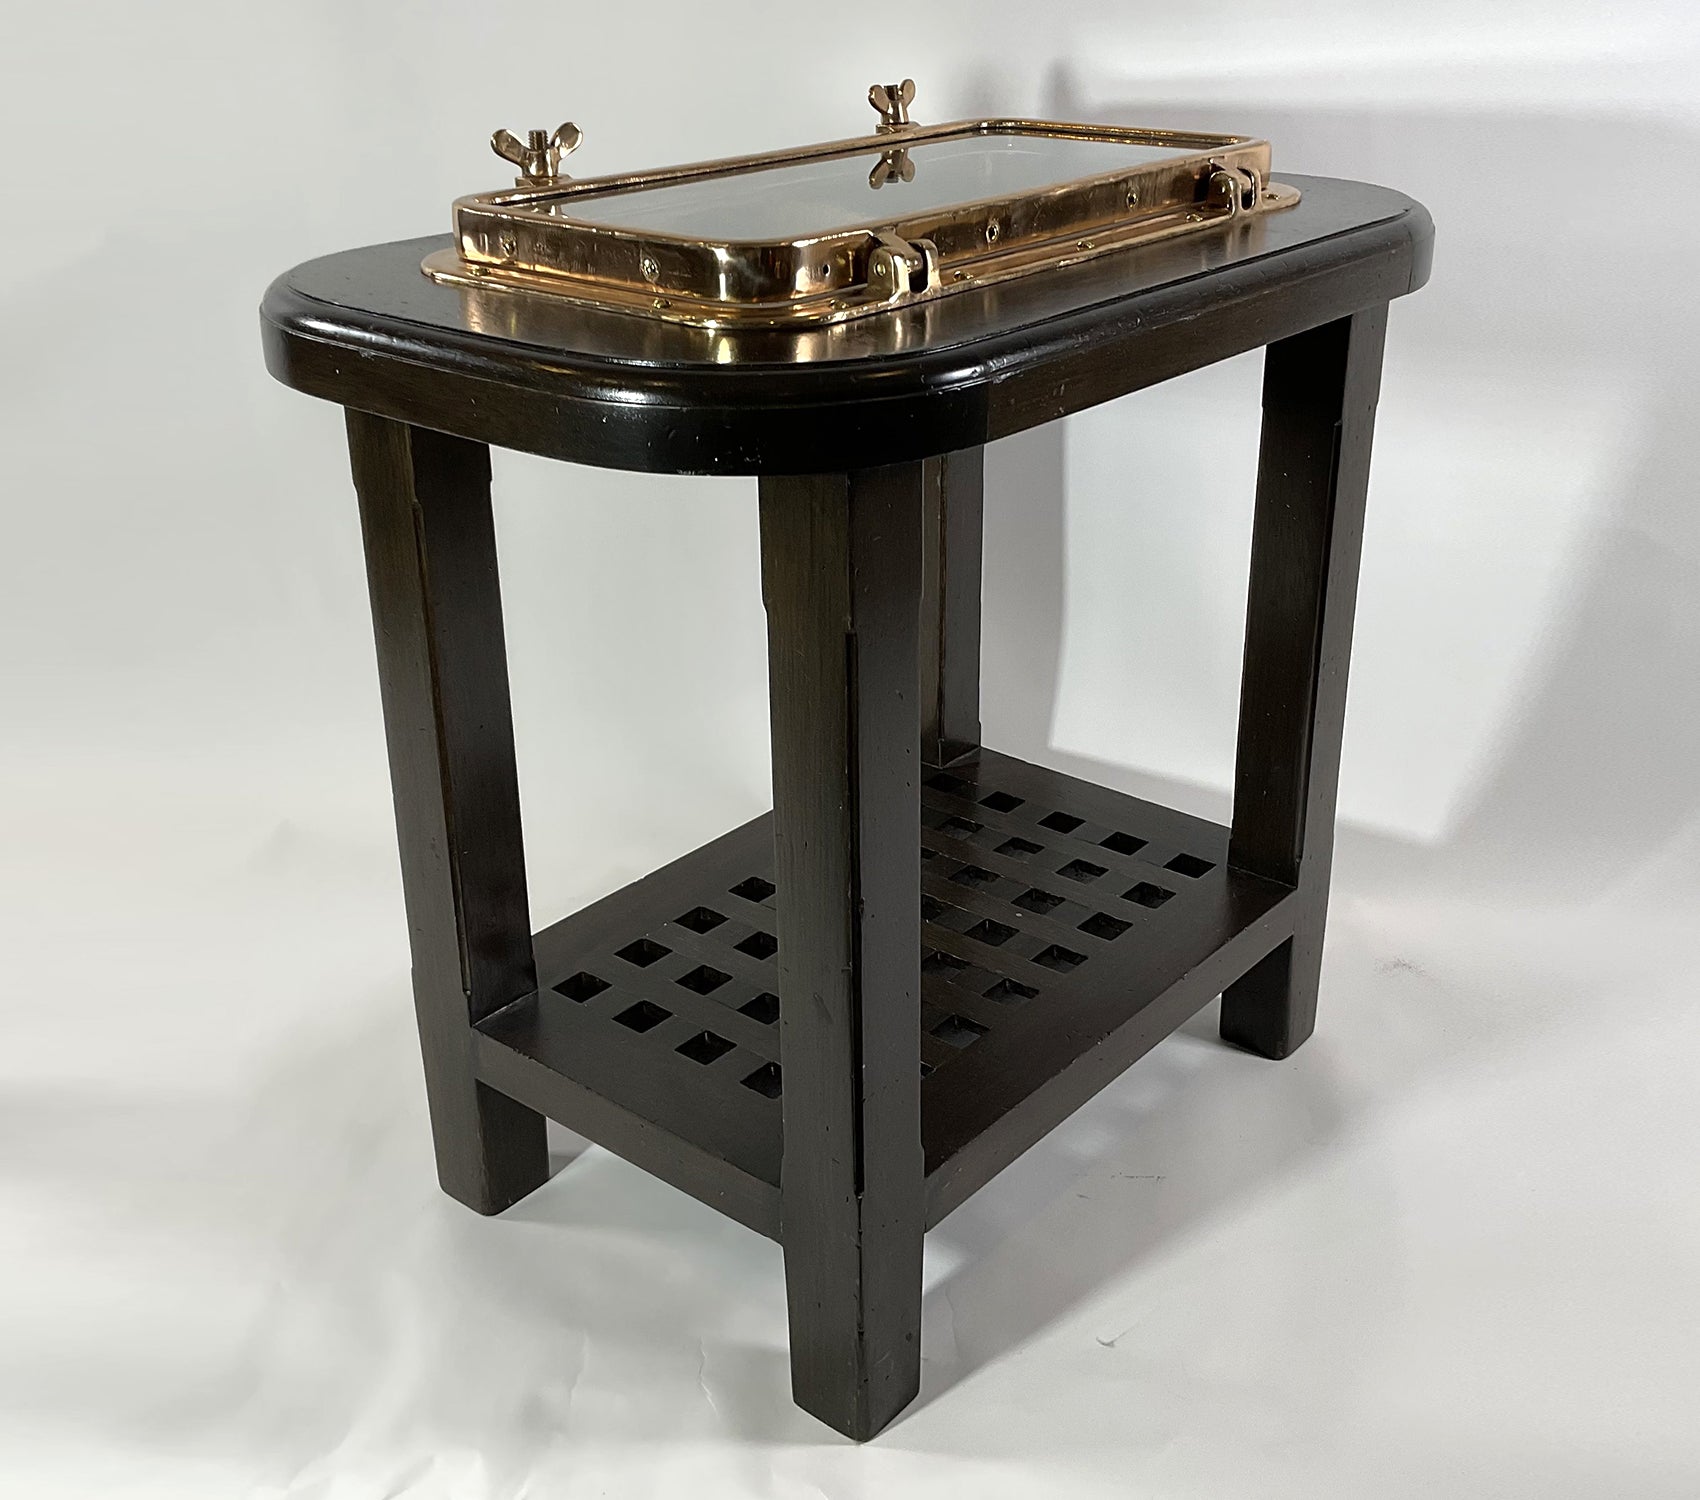 Solid Brass Ships Porthole Table - Lannan Gallery